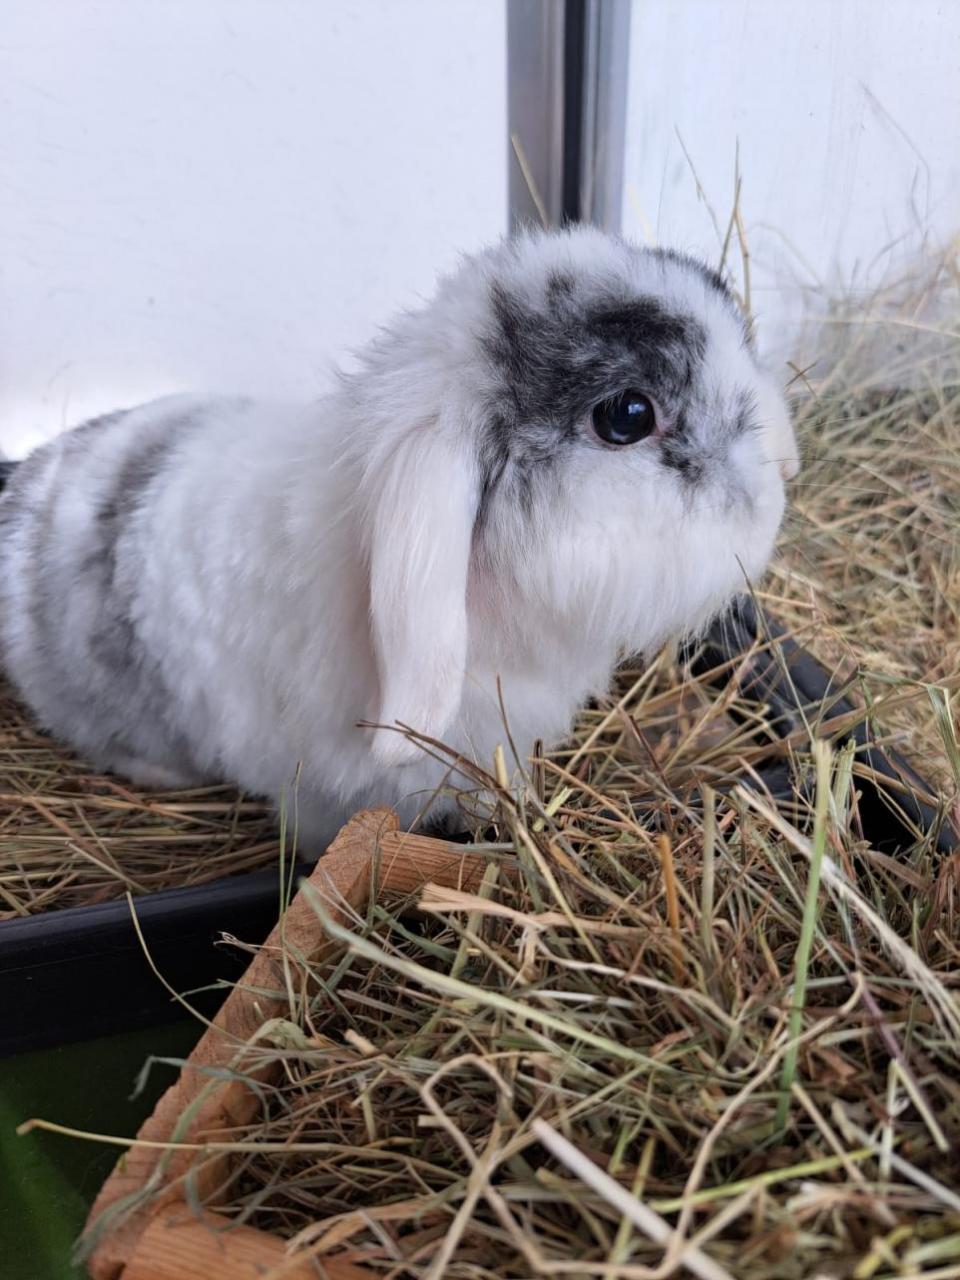 Cambs Times: The RSPCA is appealing for information after three rabbits - Melanie, Miffy and Speedy - were left